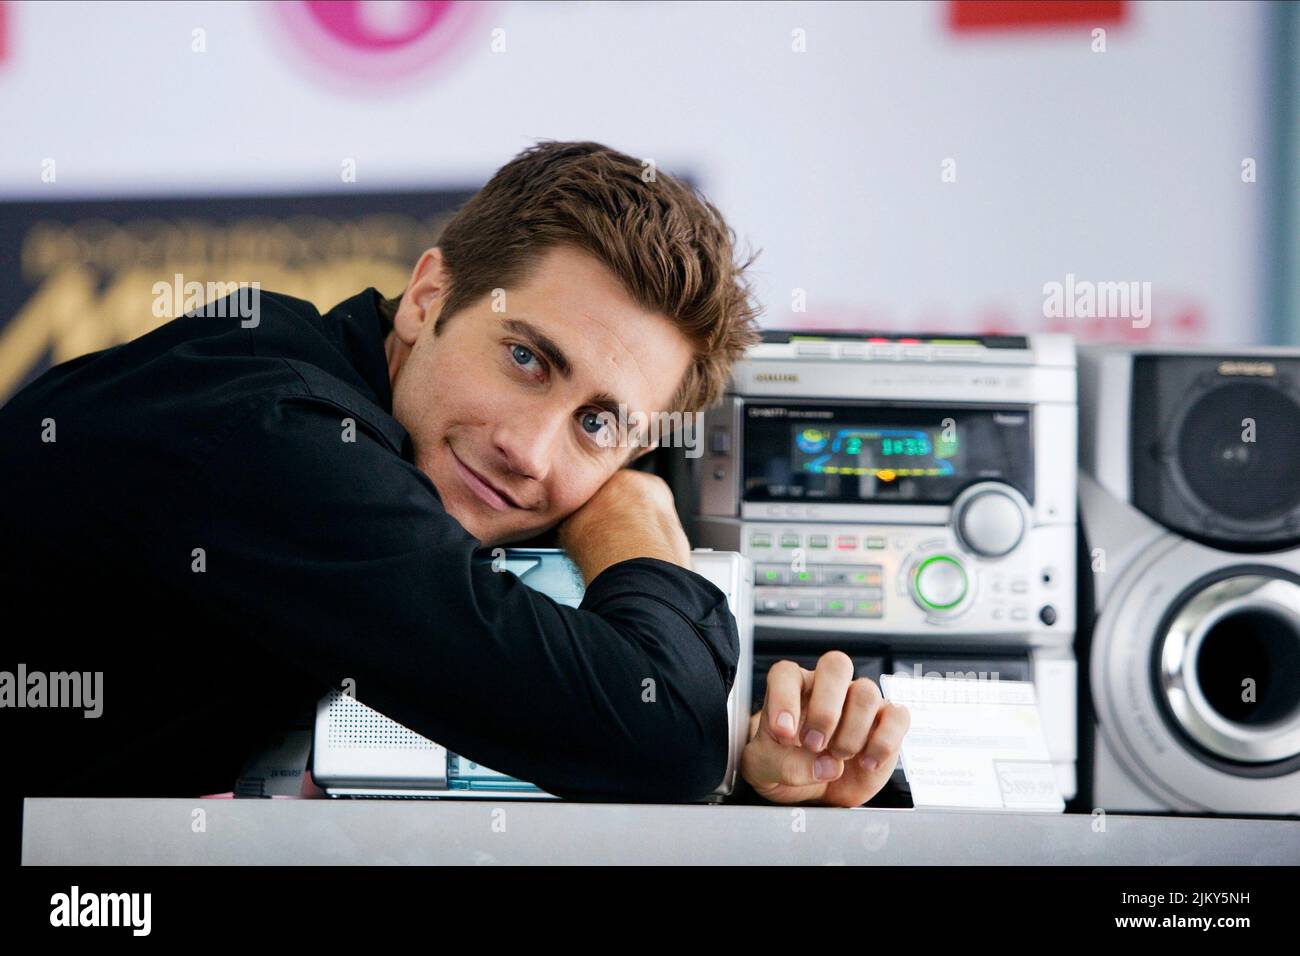 JAKE GYLLENHAAL, LOVE AND OTHER DRUGS, 2010 Stock Photo